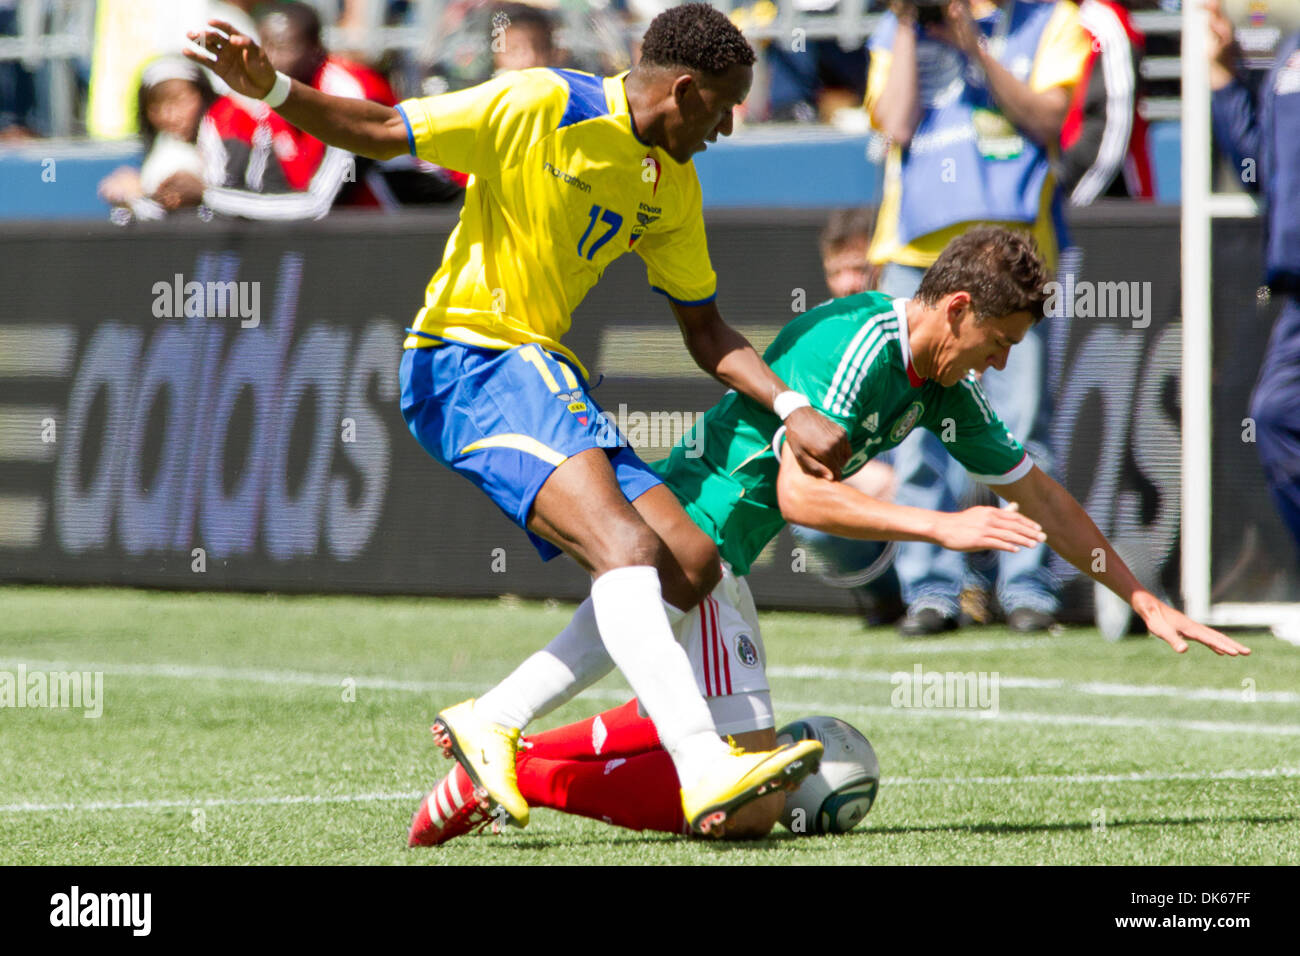 May 28, 2011 - Seattle, Washington, U.S - Mexico defender Hector Moreno (15) falls in front of Ecuador forward Jaime Ayovi (17) at Qwest Field in Seattle, Washington. The game ended in a 1-1 tie. (Credit Image: © Chris Hunt/Southcreek Global/ZUMApress.com) Stock Photo